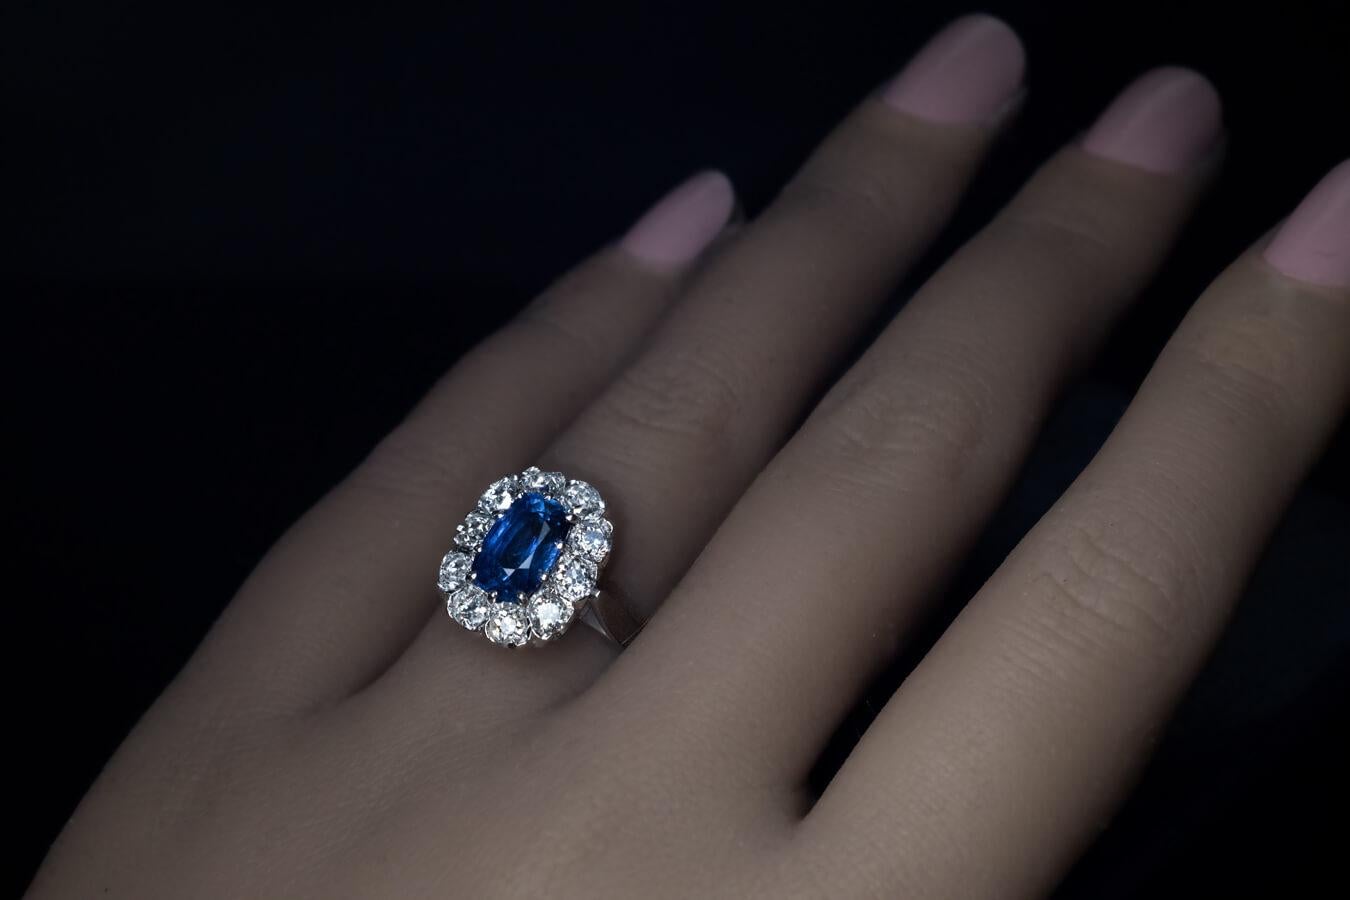 European, circa 1950
The ring is crafted in white 18K gold. It is centered with a cushion cut genuine sapphire measuring 9 x 5.9 x 4.9 mm. The sapphire is surrounded by pre-1900 chunky old mine cut diamonds (G-H color, VS1 – SI1 clarity).
Estimated